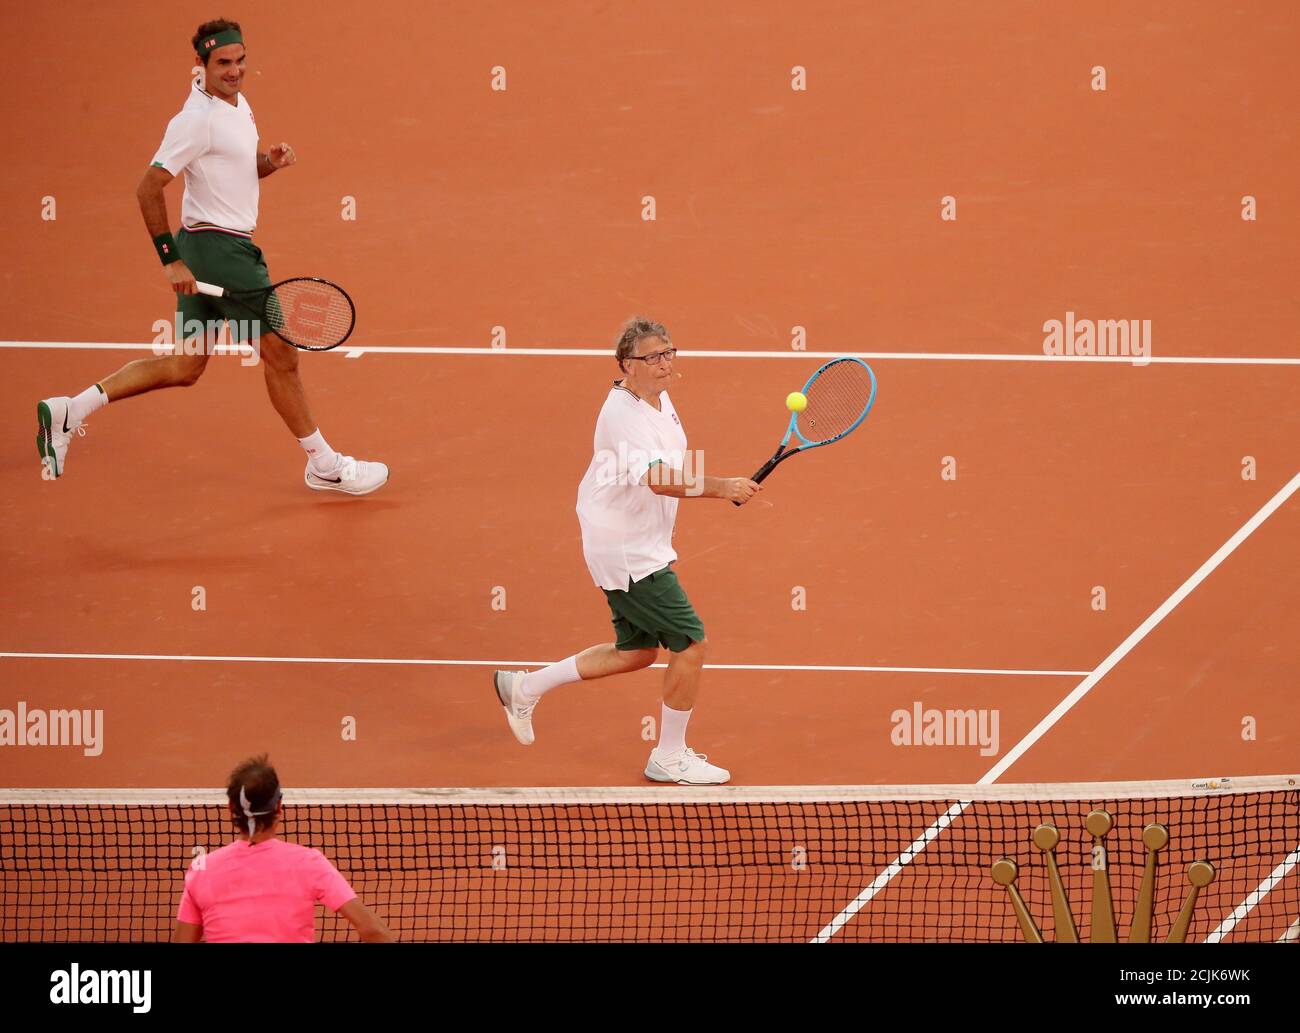 Tennis - "The Match In Africa" Exhibition Match - Cape Town Stadium, Cape  Town, South Africa - February 7, 2020 Switzerland's Roger Federer and Bill  Gates in action during the doubles match